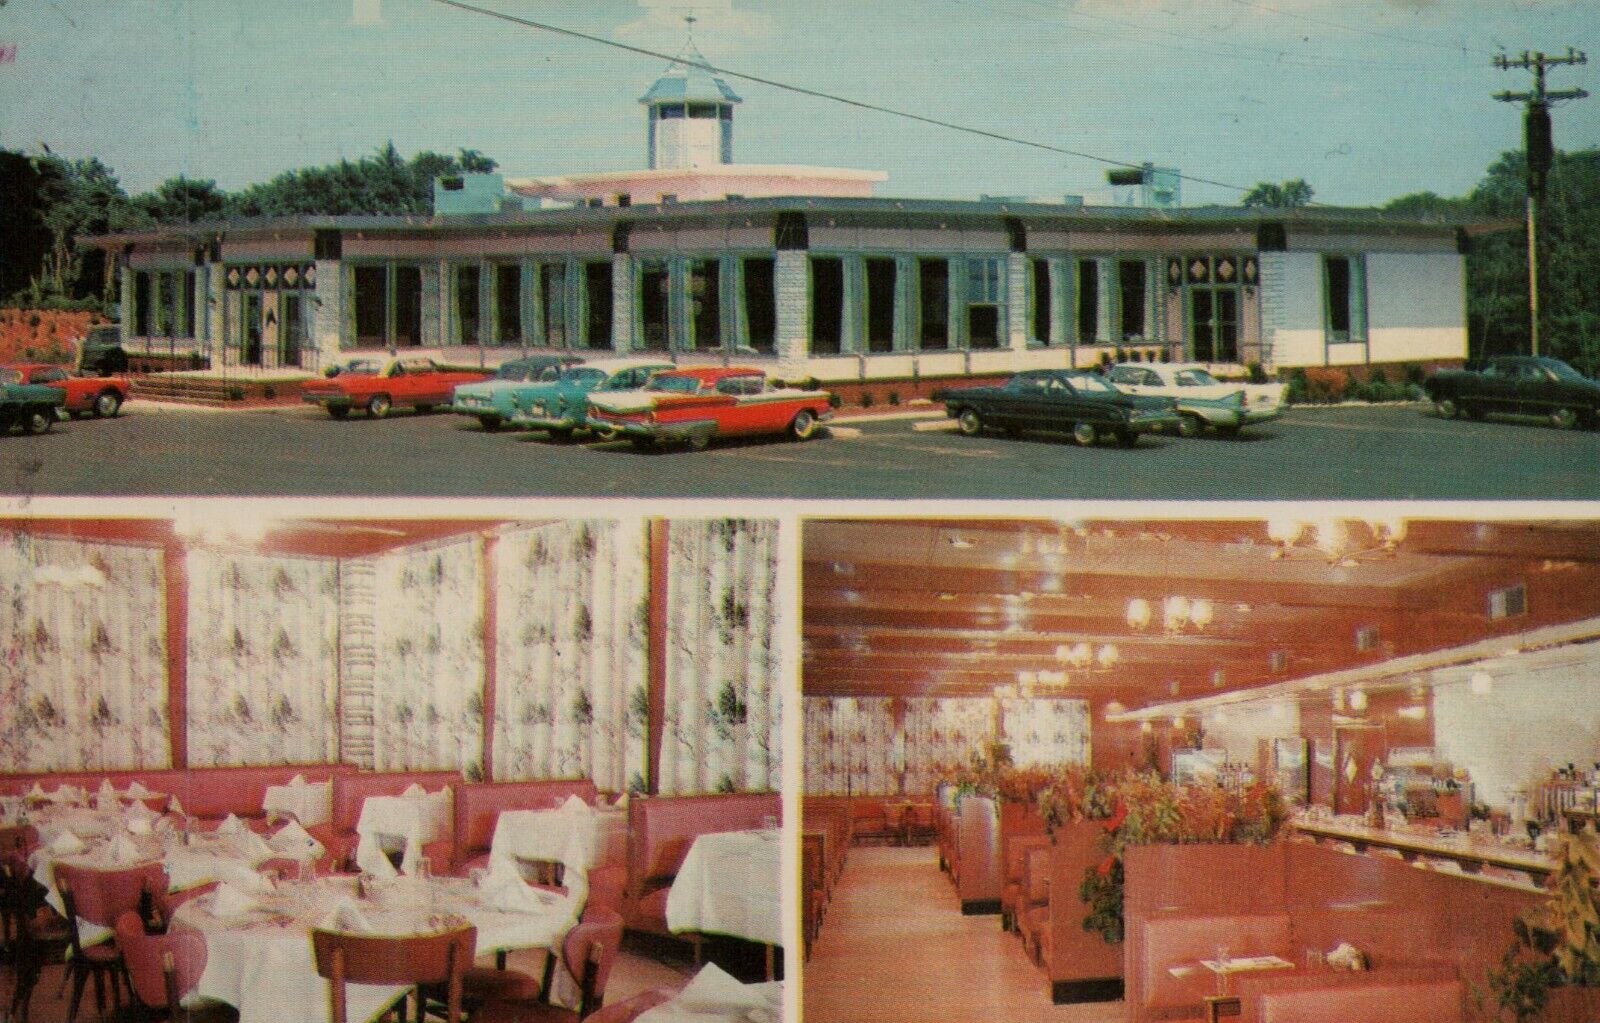  Vtg Postcard Trotters & Pacers Diner Freehold New Jersey Old Cars